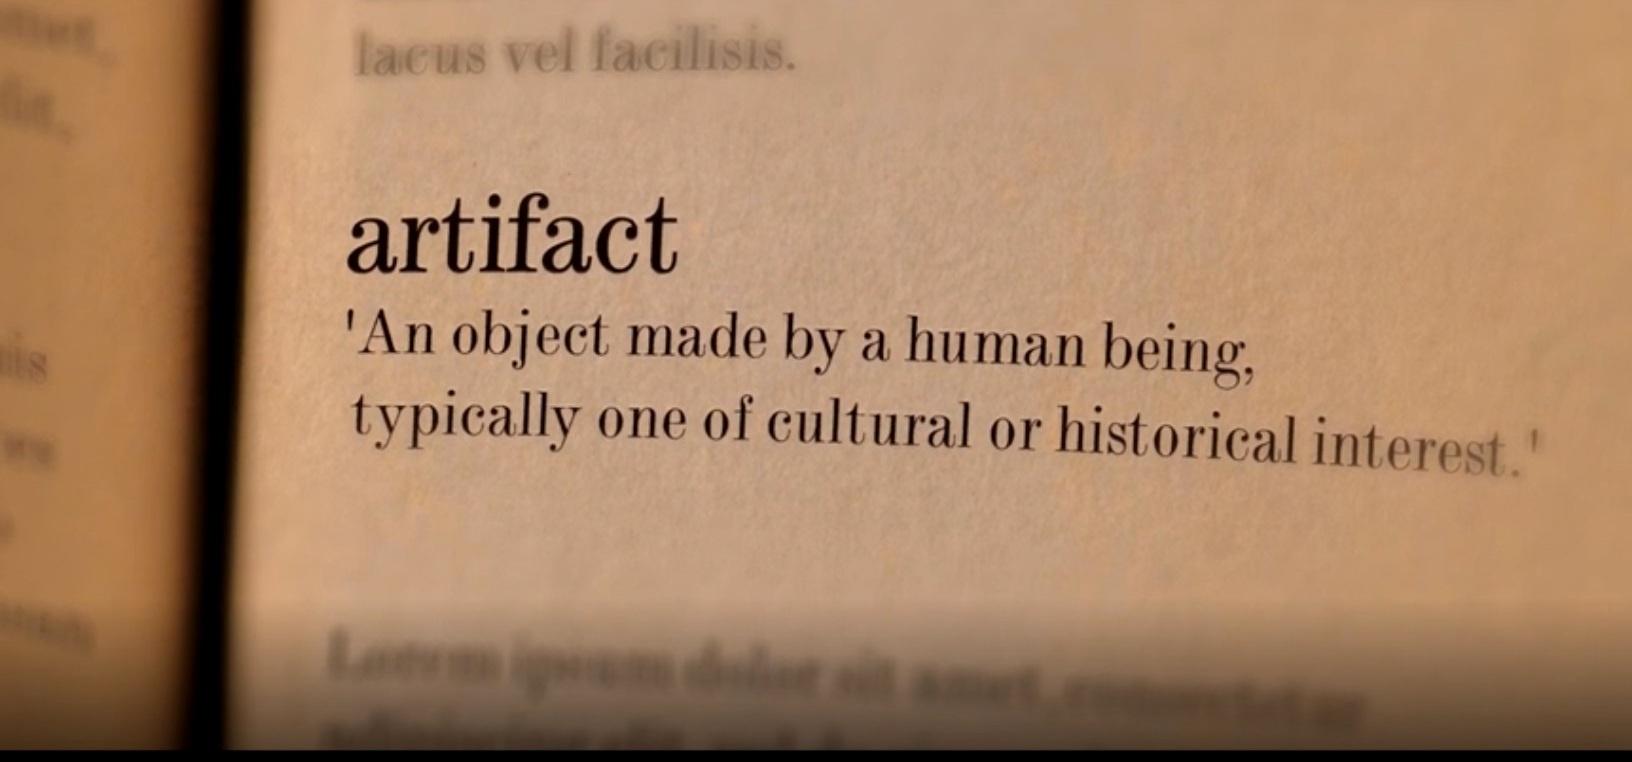 The definition of artifact - An object made by a human being, typically one of cultural or historical interest. 